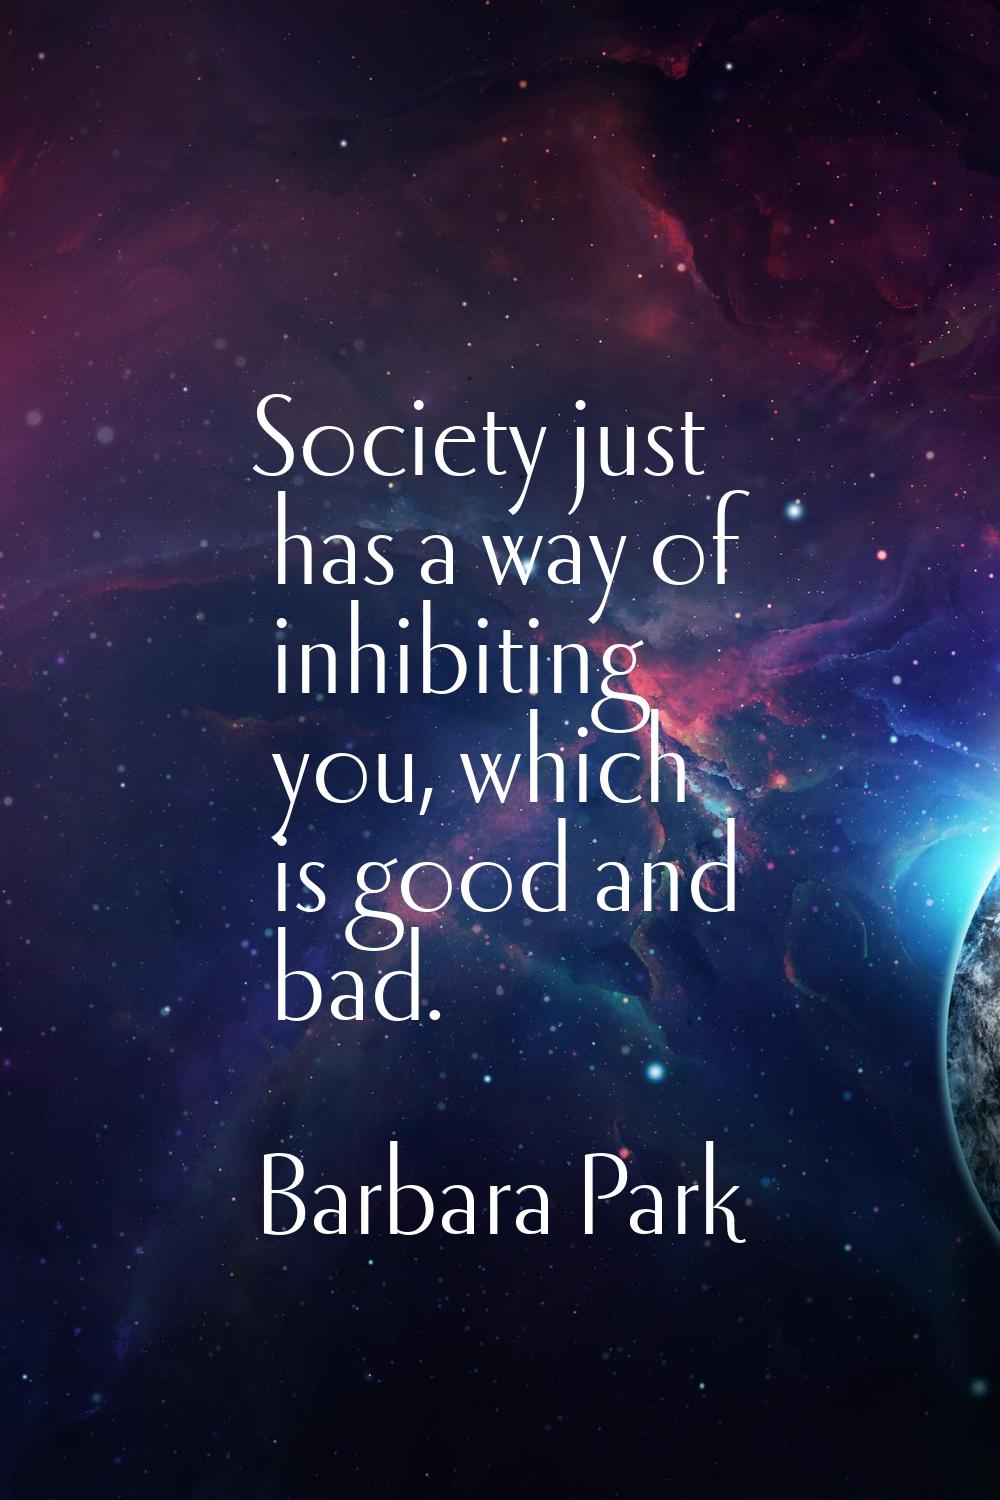 Society just has a way of inhibiting you, which is good and bad.